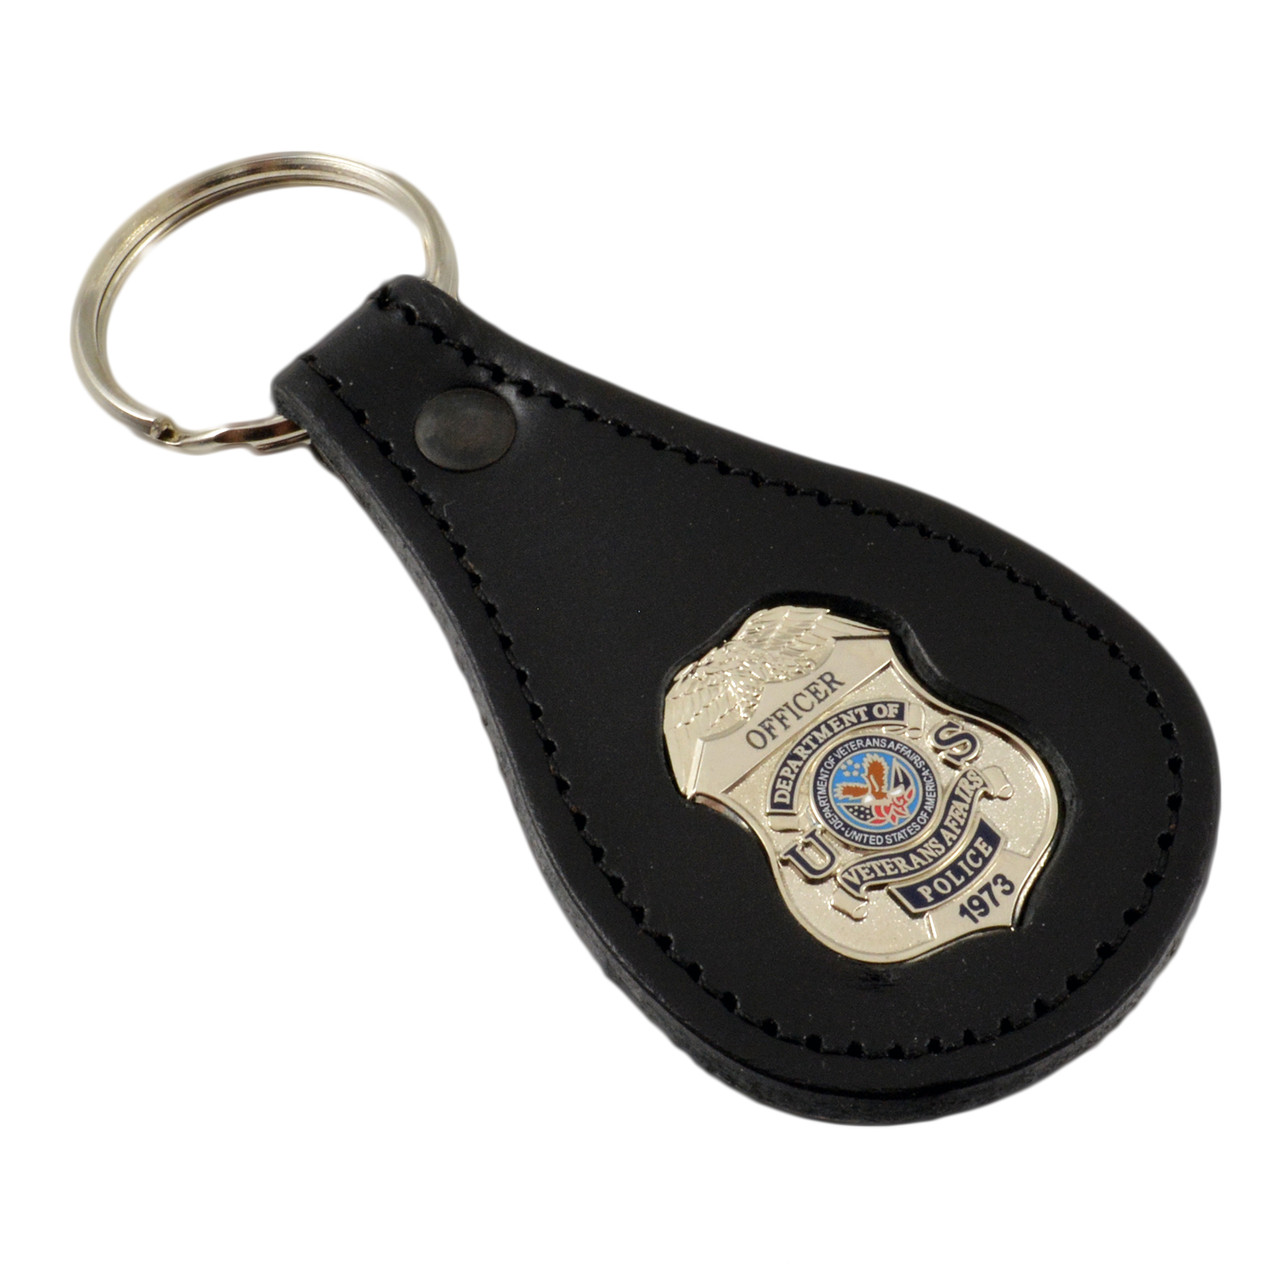 Protec Compact Belt Pouch - Police Supplies